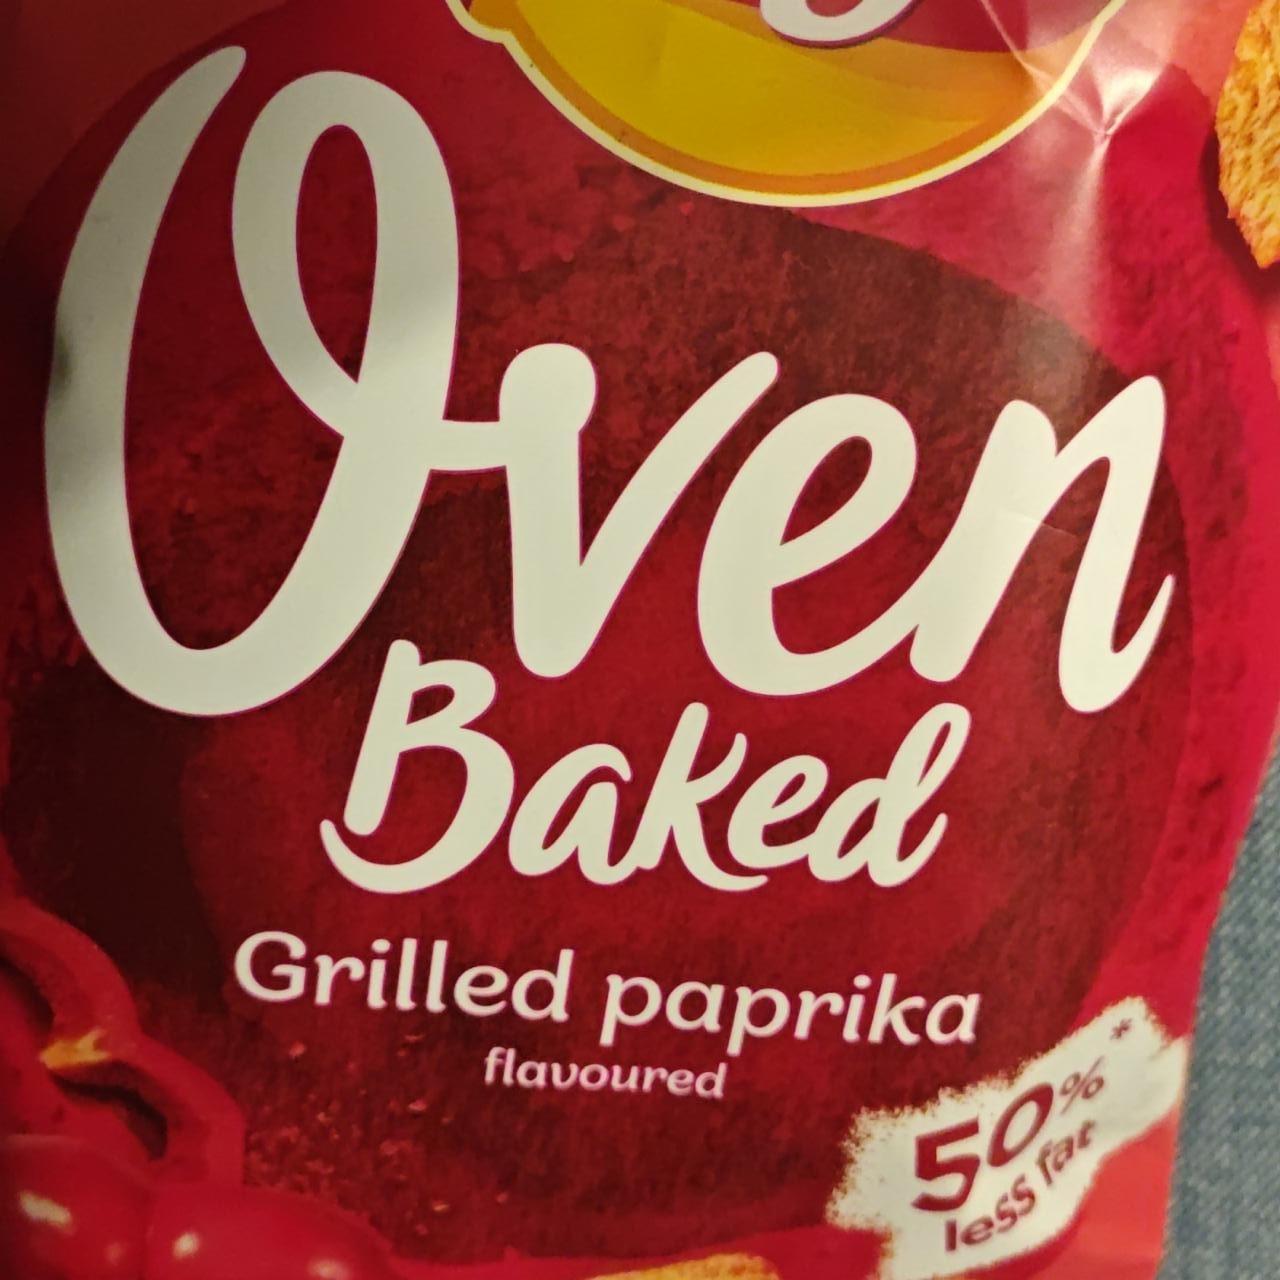 Zdjęcia - Oven Baked Grilled paprika flavoured Lay's